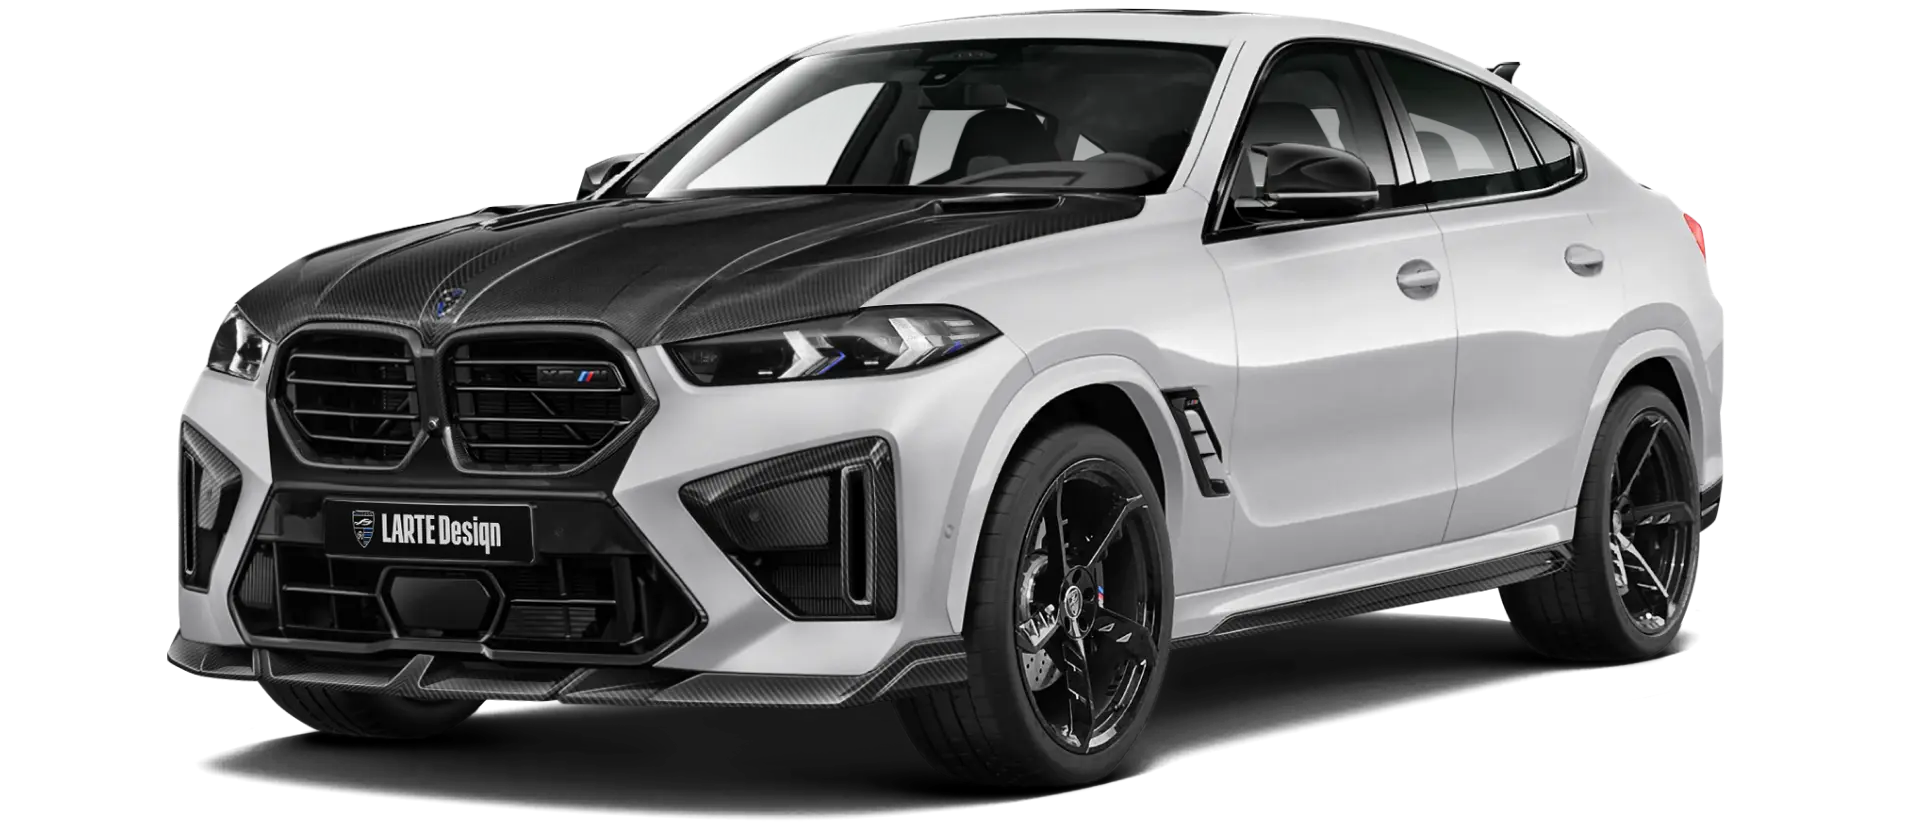 BMW X6M F96 LCI 2023 with carbon body kit: front view shown in White mineral